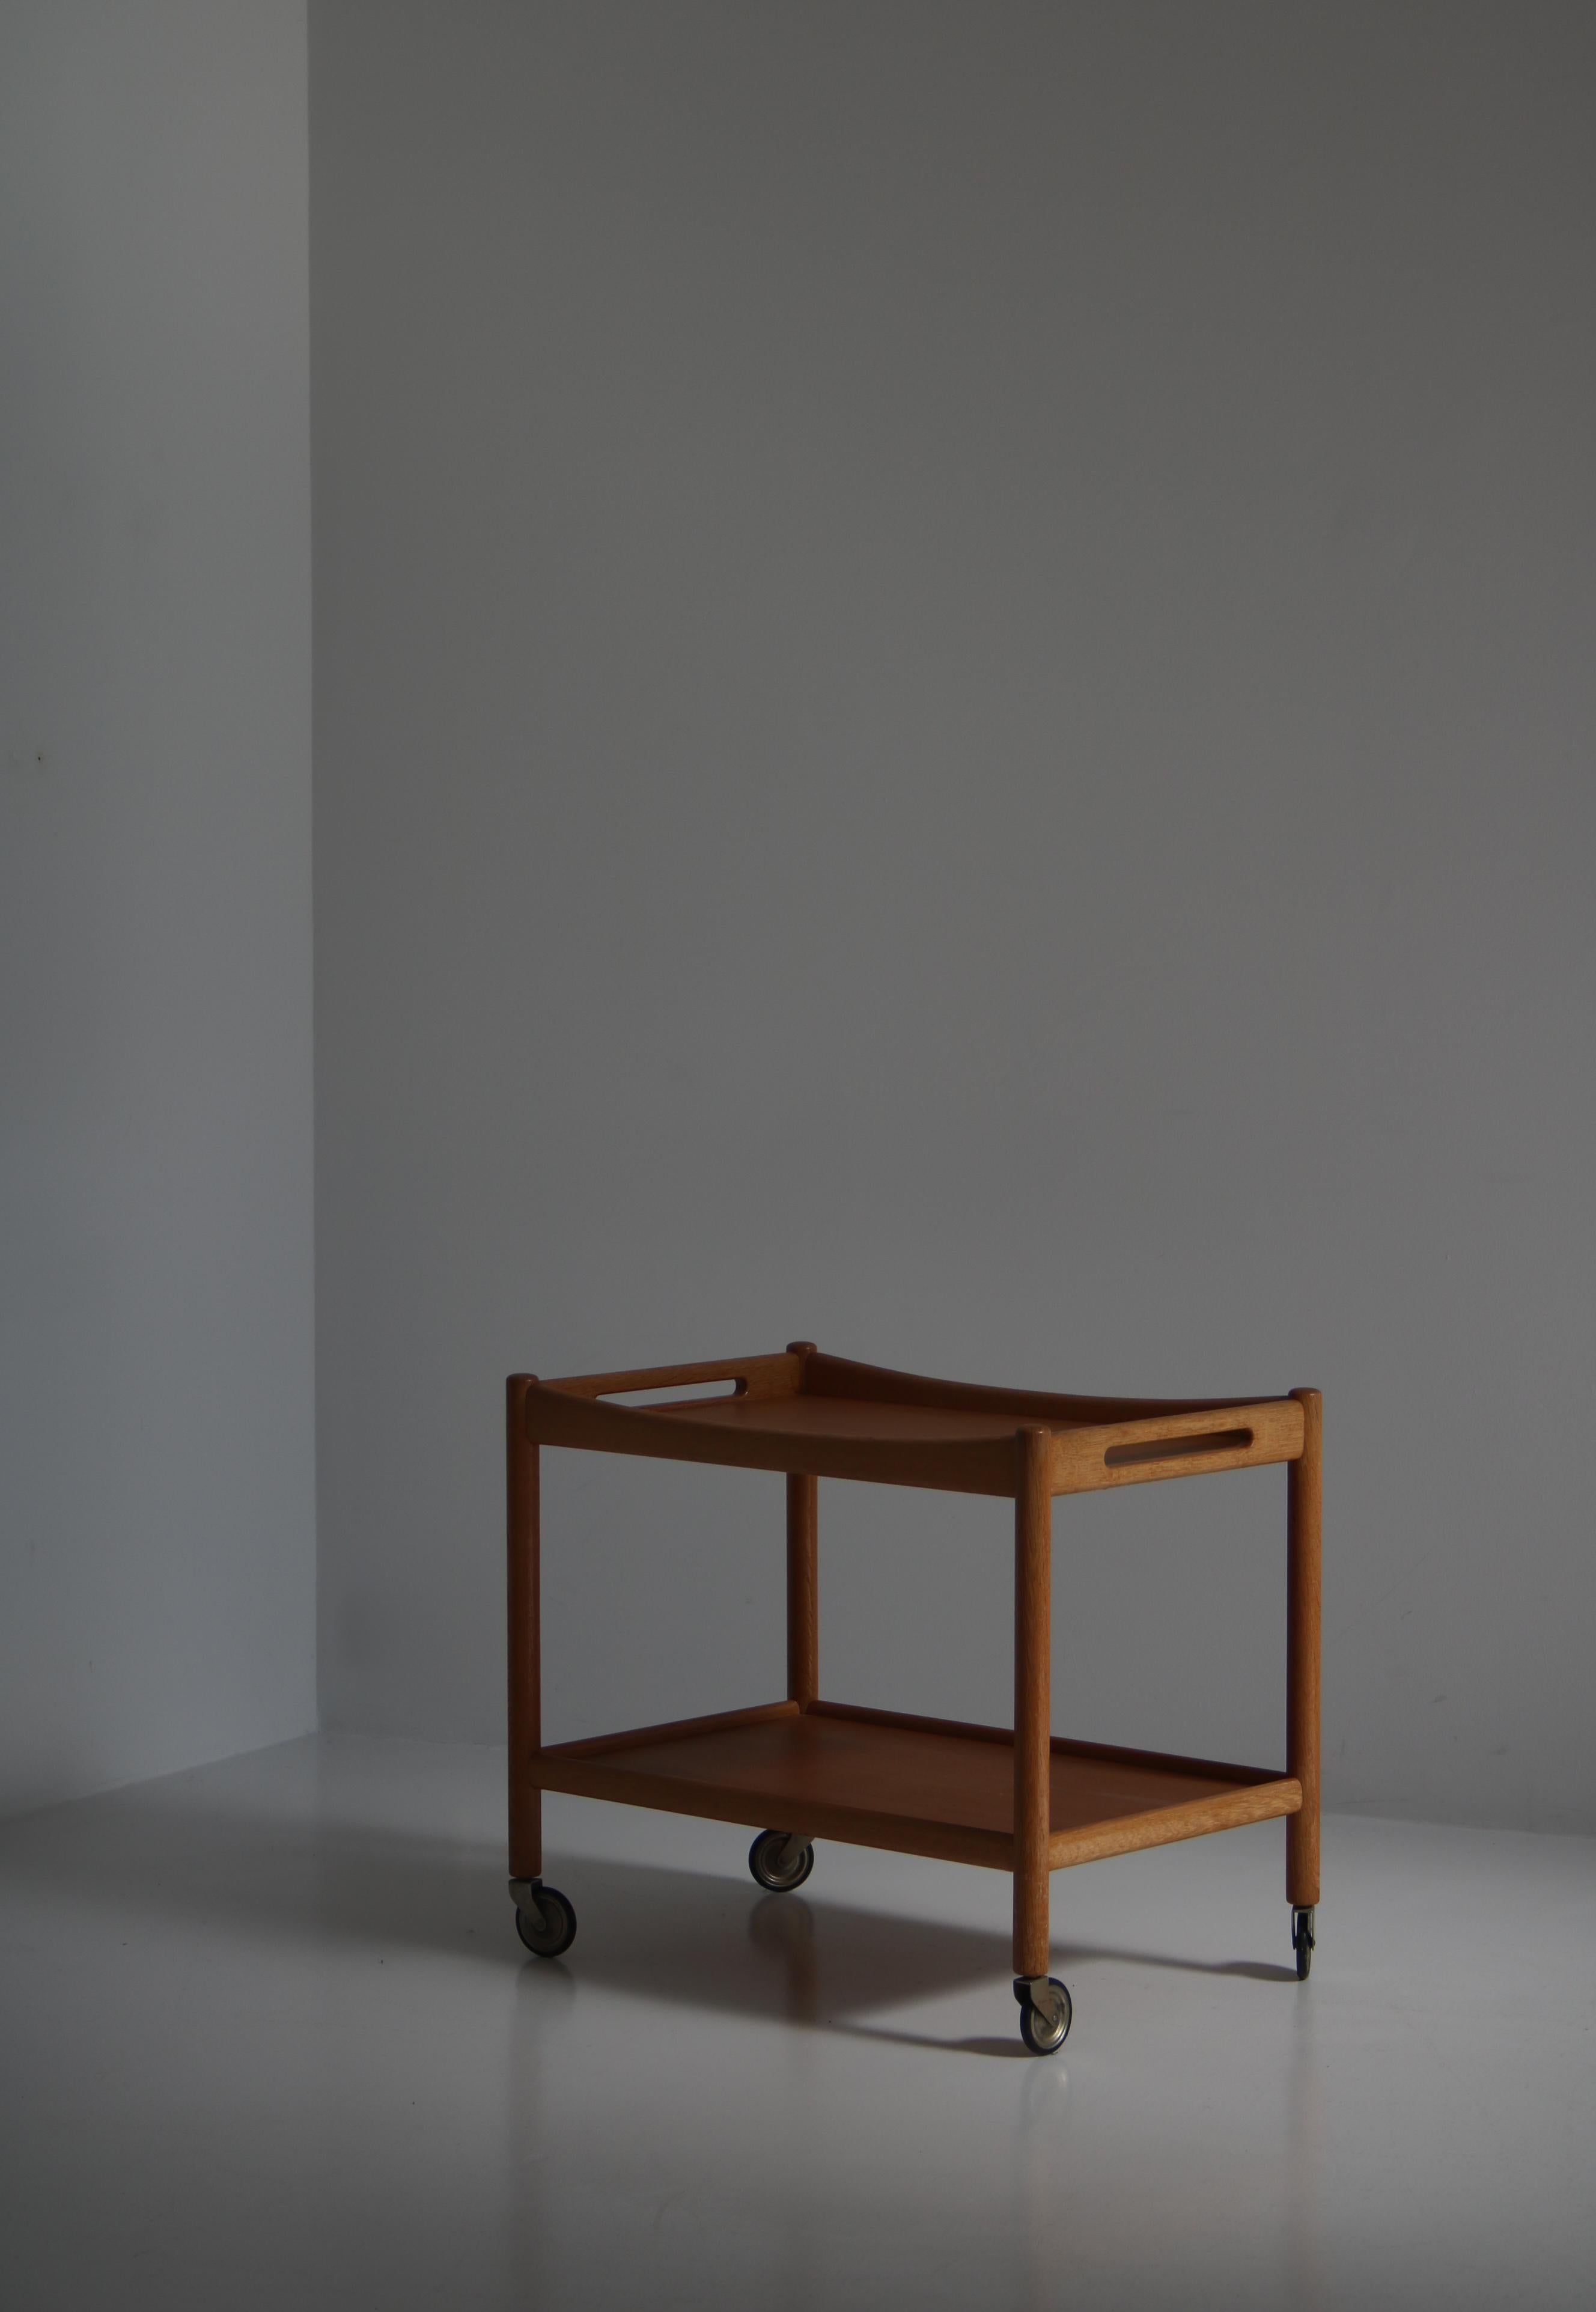 Wonderful serving cart from the 1960s by Hans J. Wegner, Denmark. Made at cabinetmaker Andreas Tucks workshop in Odense. The table is made from solid oak and iron castors. All parts are original and the table is in great working condition. It glides